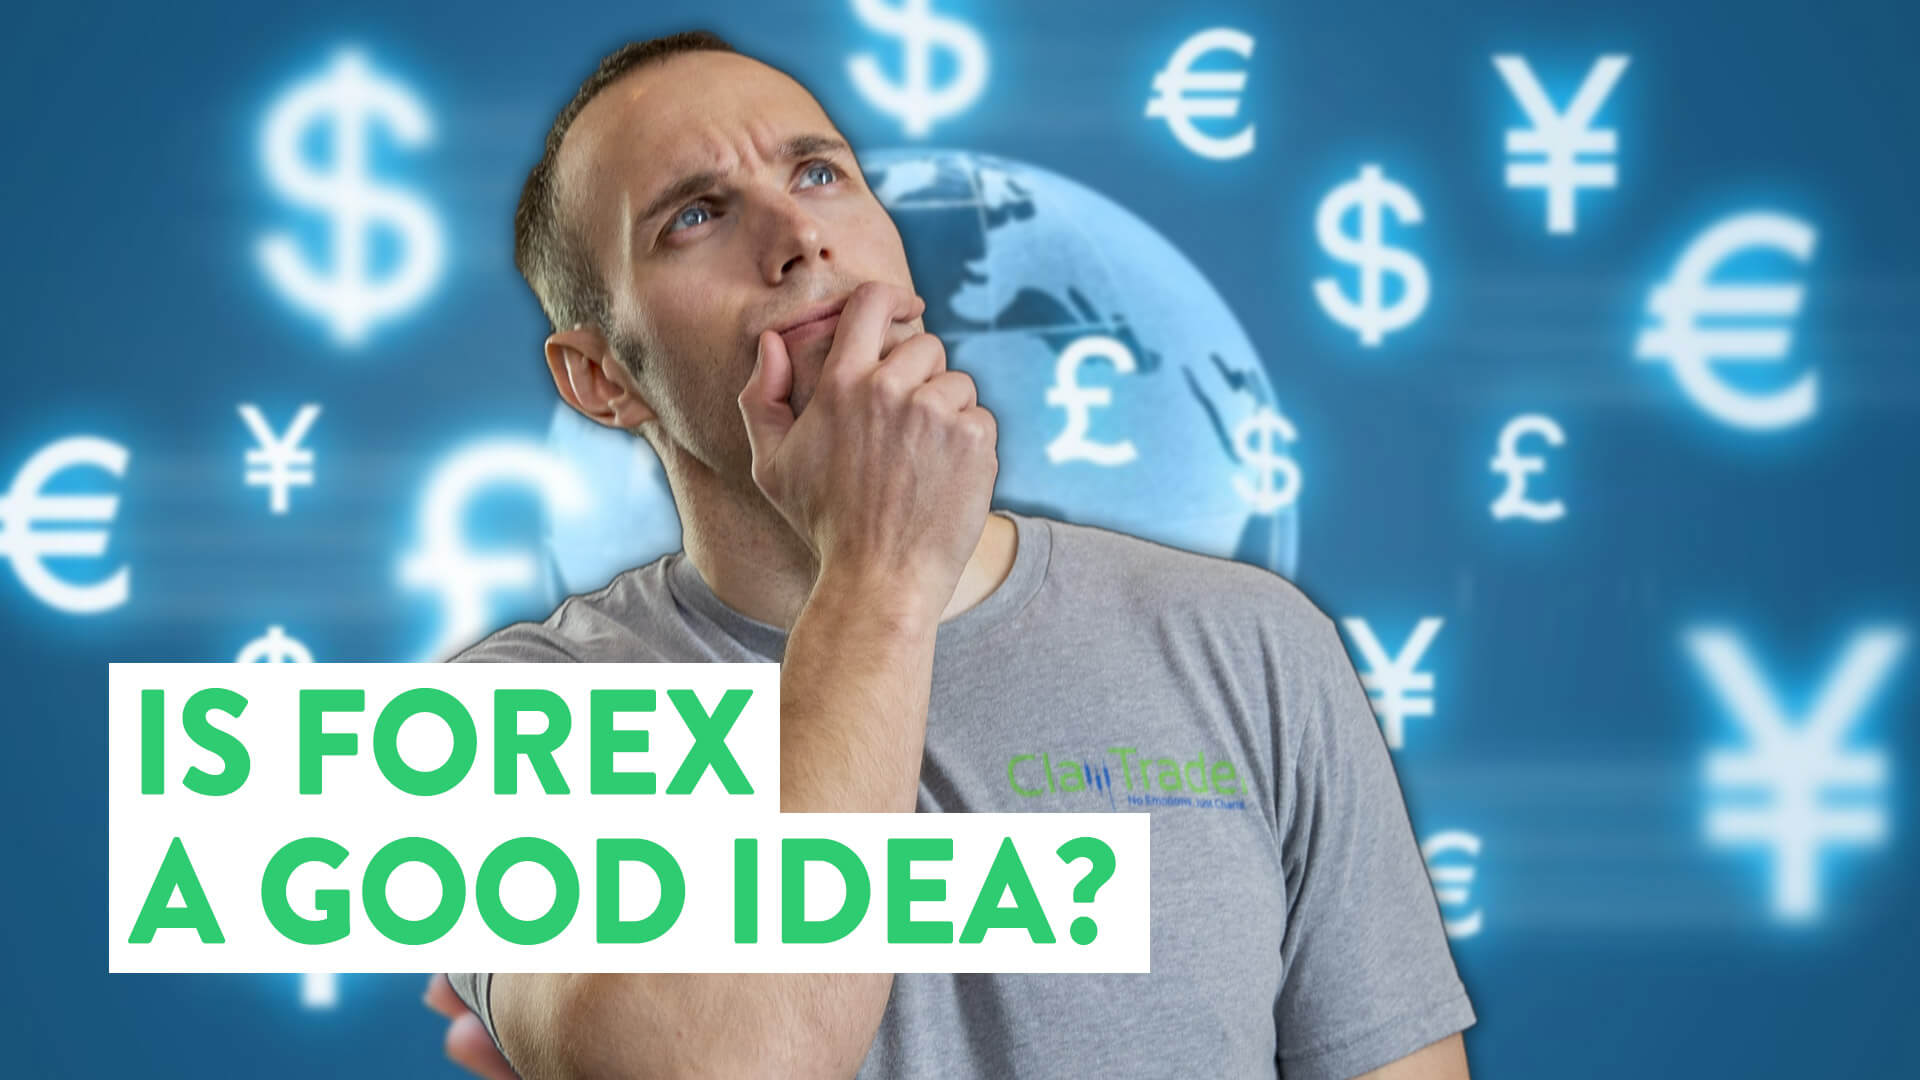 Should You Learn How to Trade Forex to Make Money?